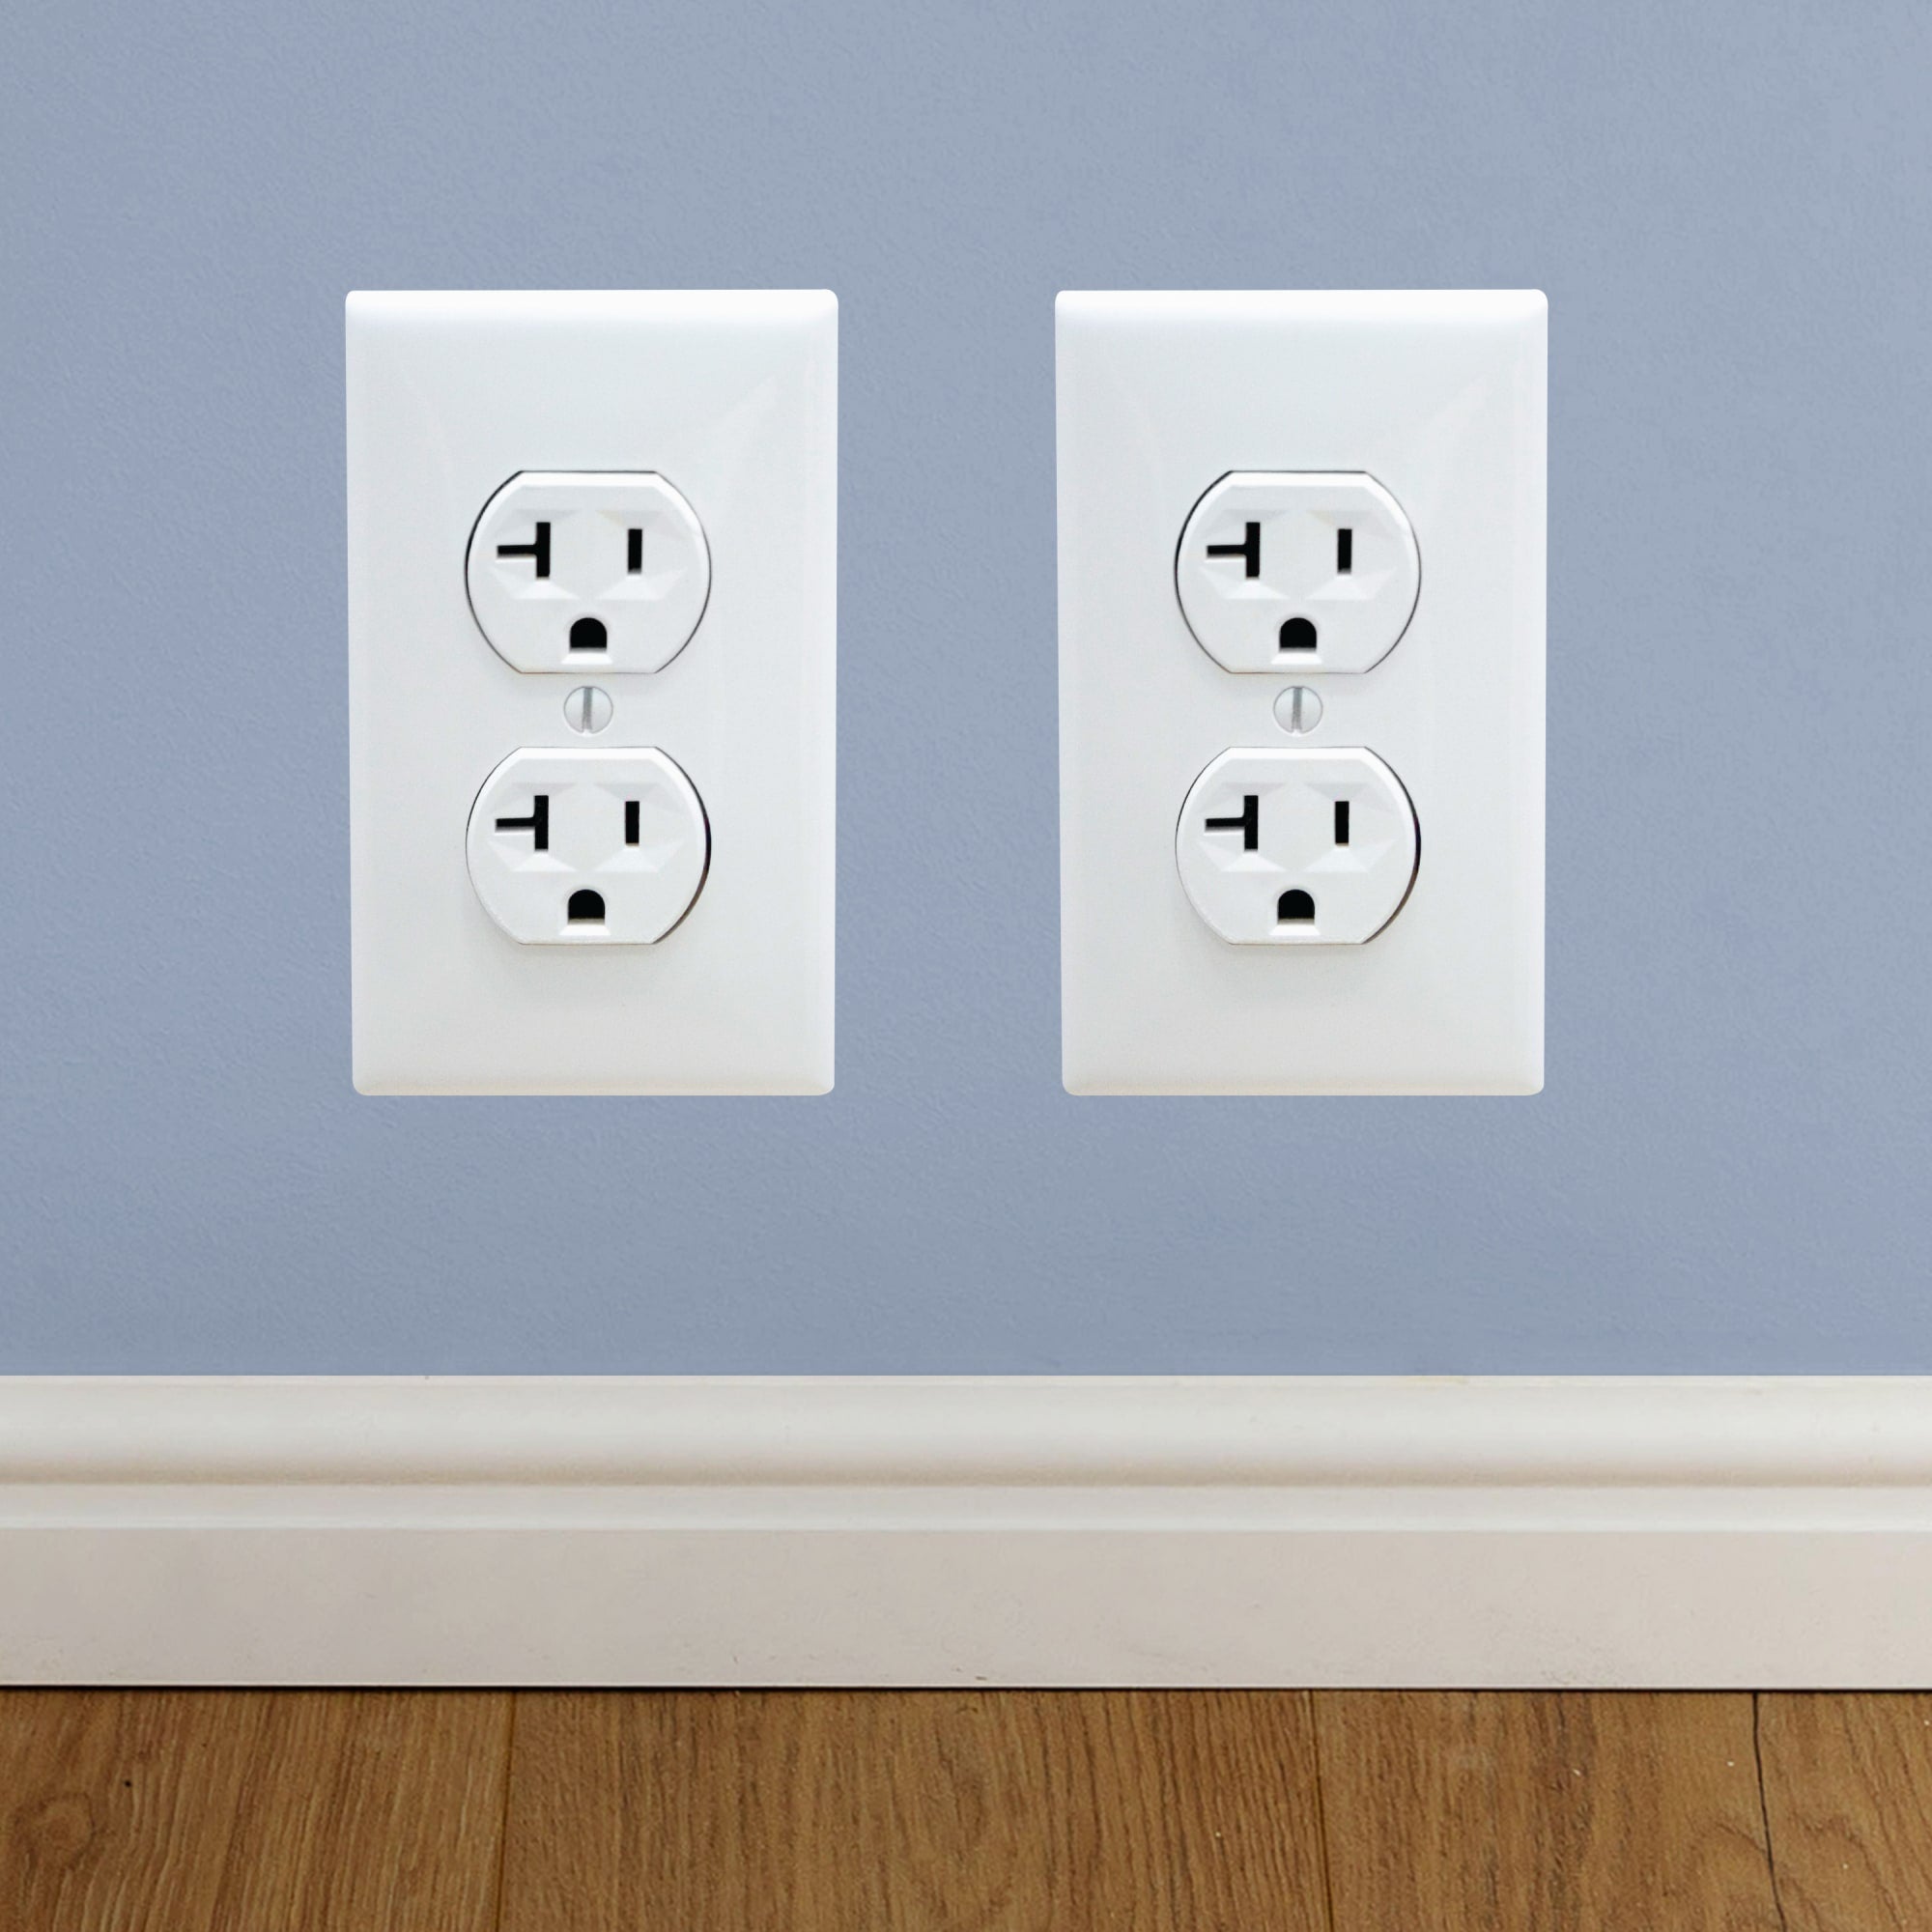 Fake Socket Collection - Removable Vinyl Decal 12.0"W x 17.0"H by Fathead